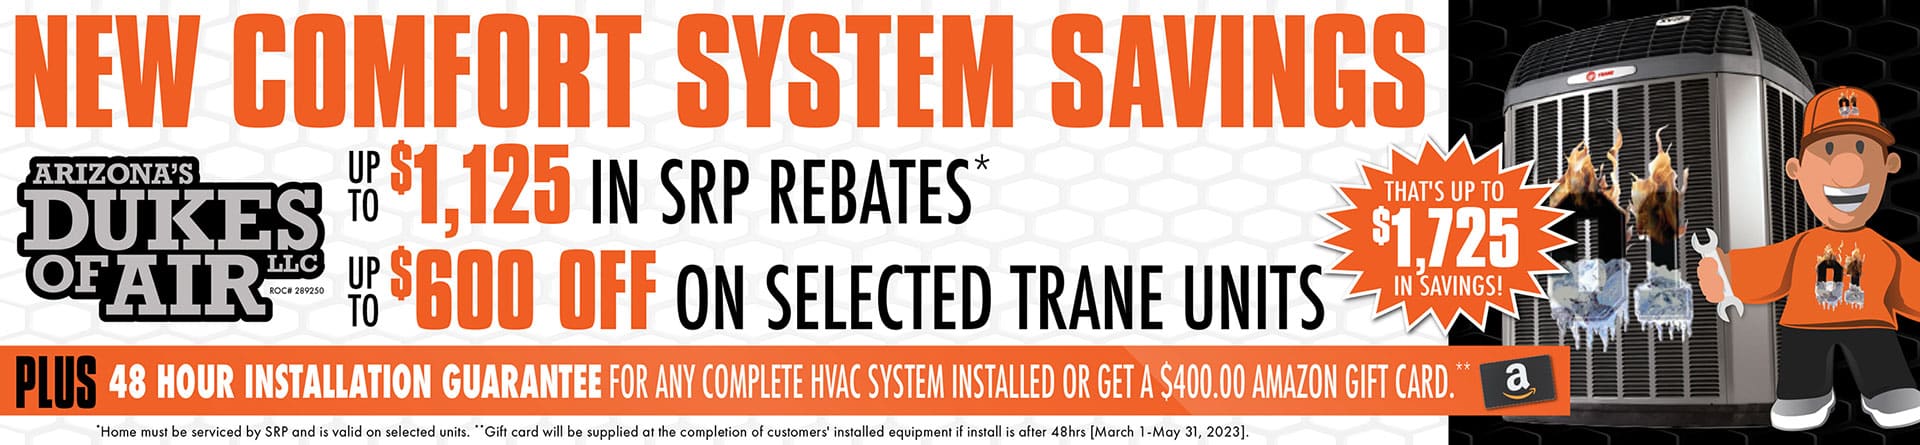 New Comfort System Savings - Up to $1,125 in SRP Rebates and more. Call for details.